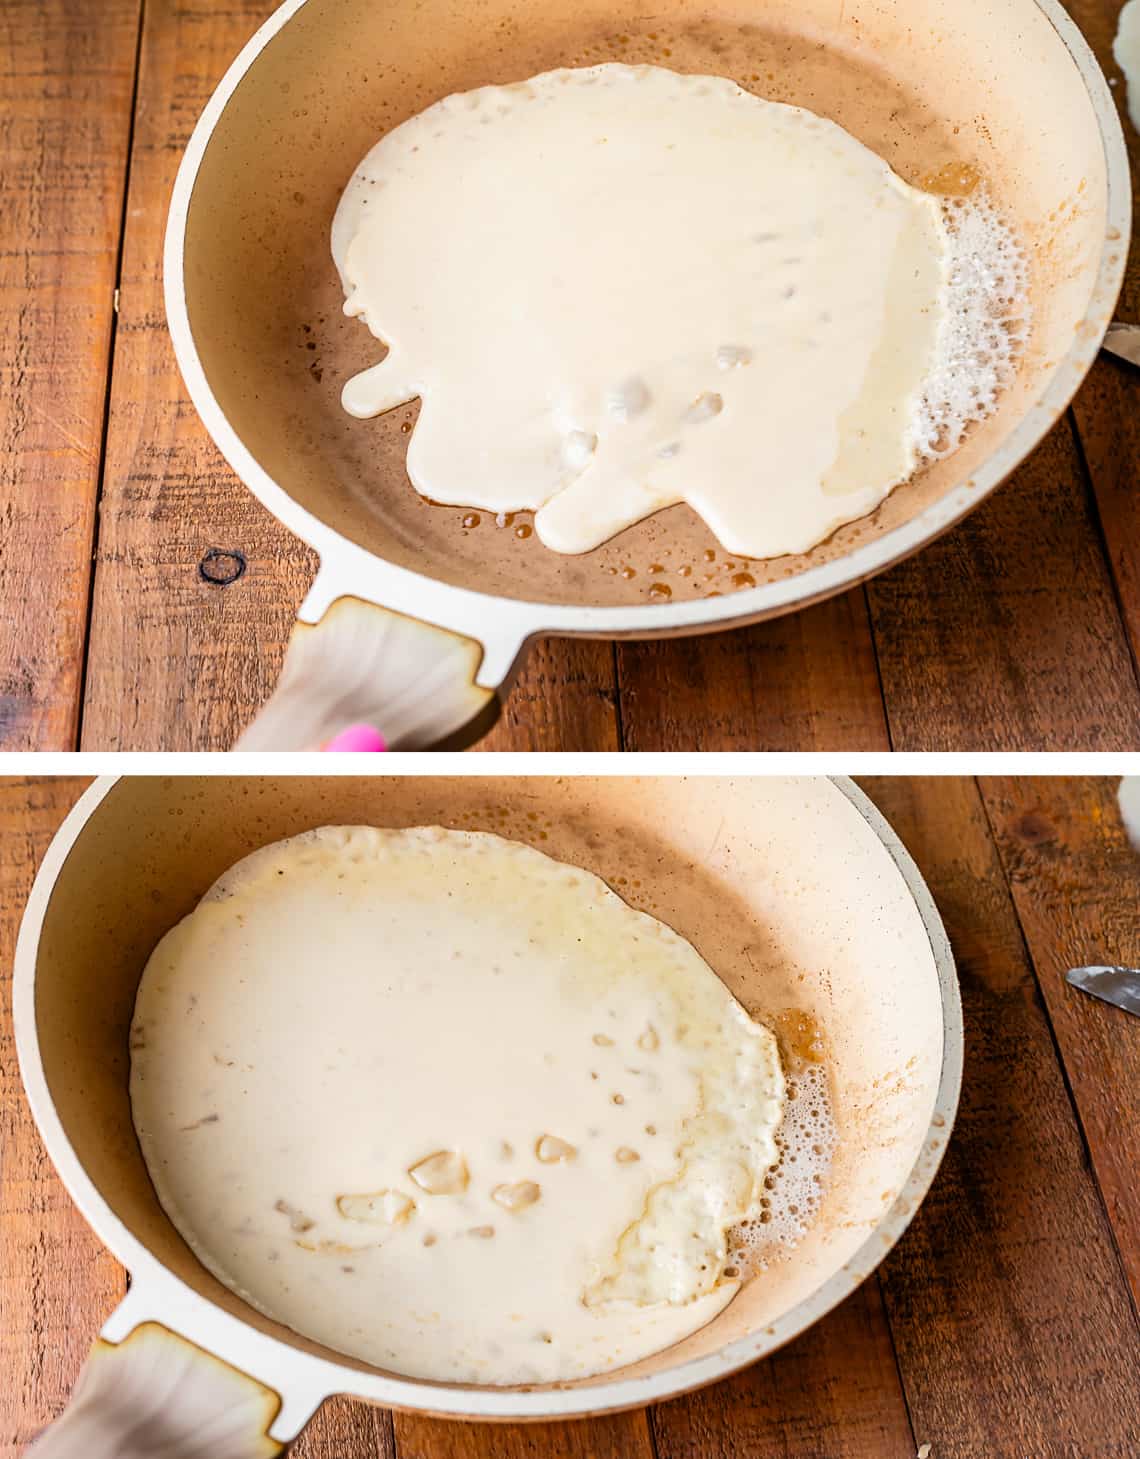 spreading crepe batter in a white frying pan, tilting pan.